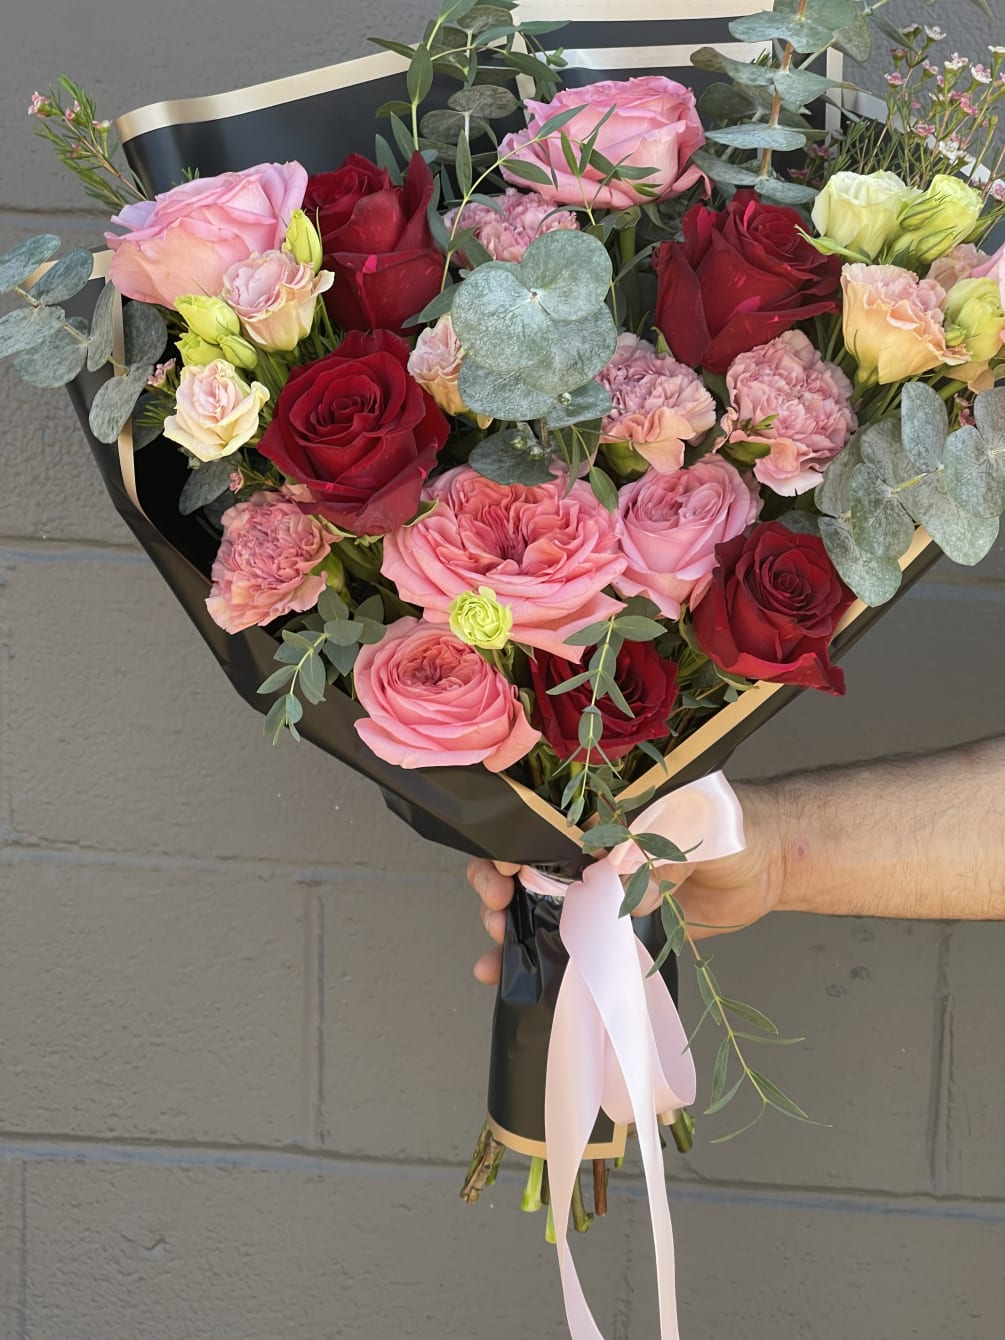 This bouquet is beautiful and created with beautiful reds, pinks and shaped